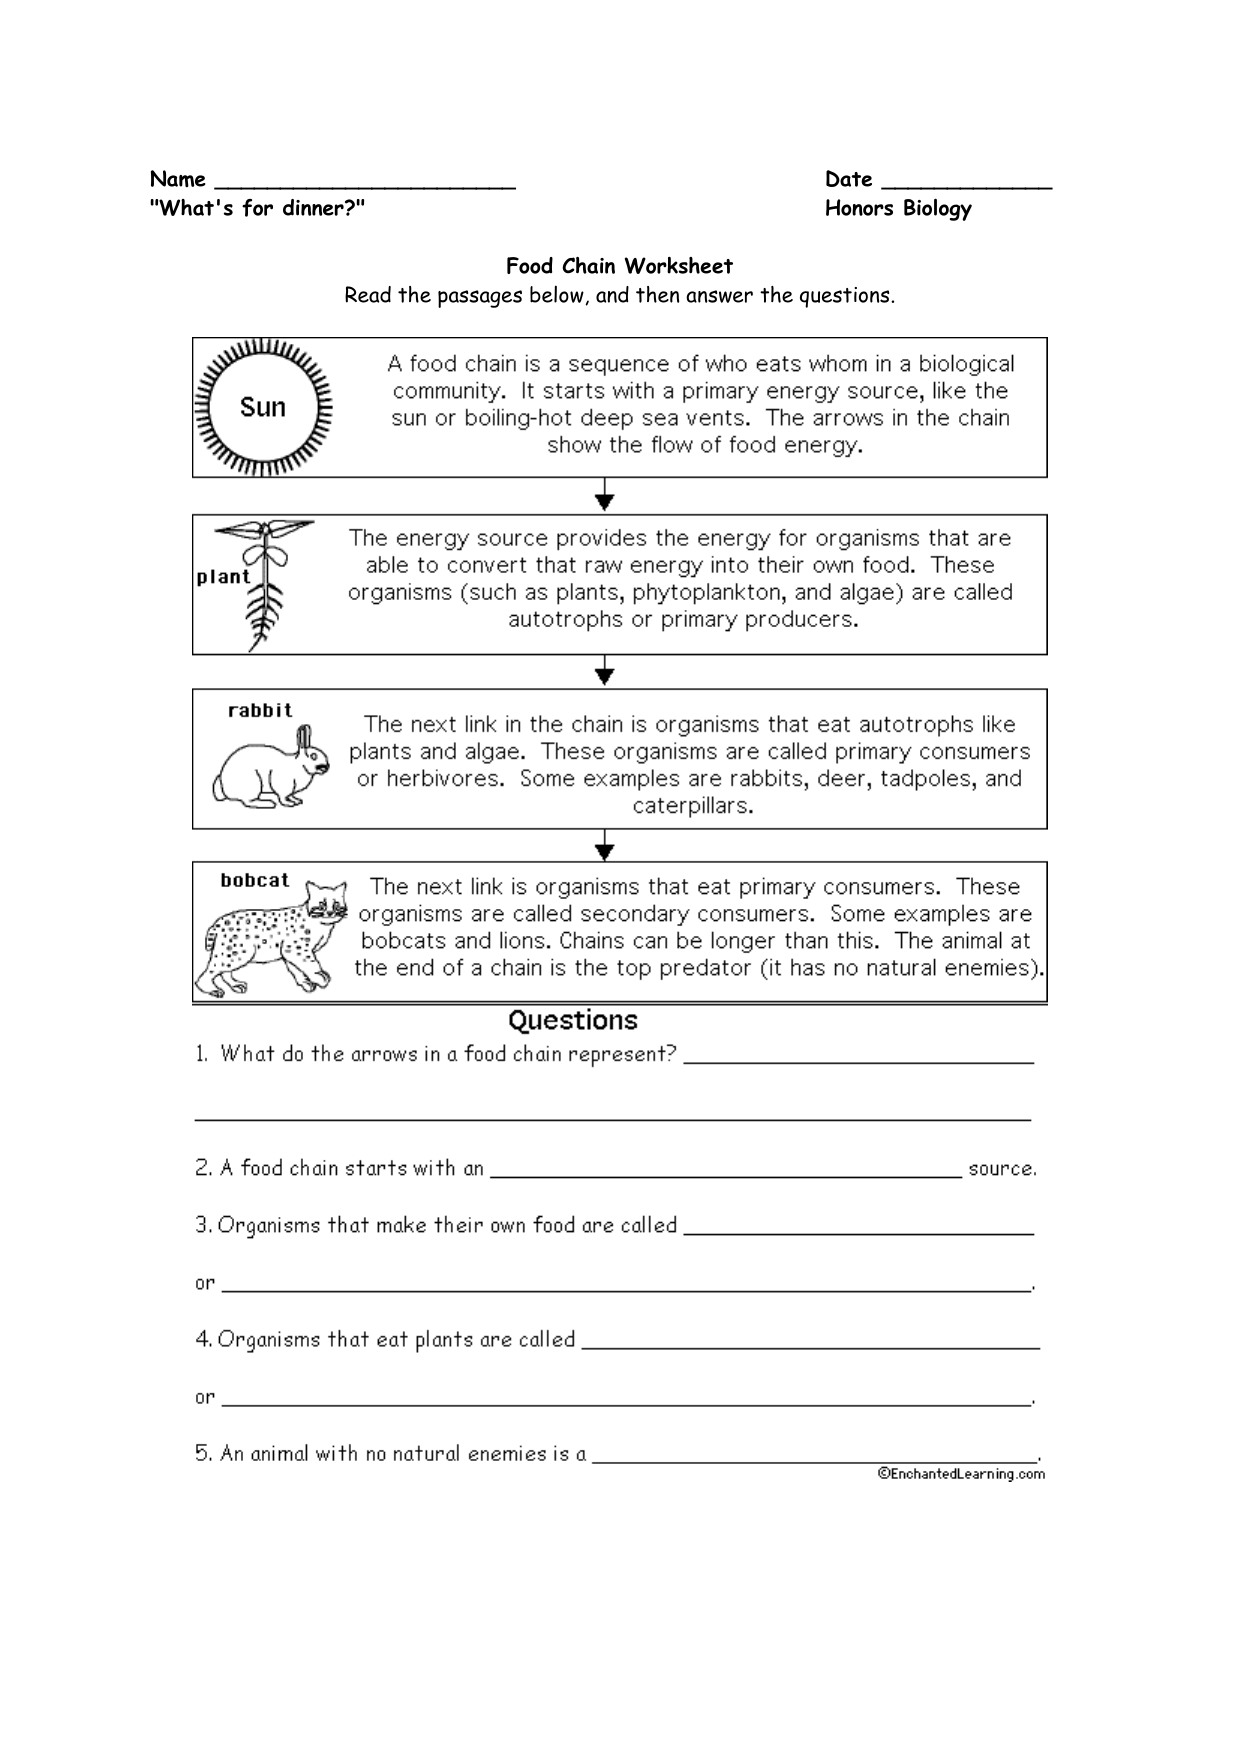 Food Chain and Food web Worksheets In Food Web Worksheet Answer Key